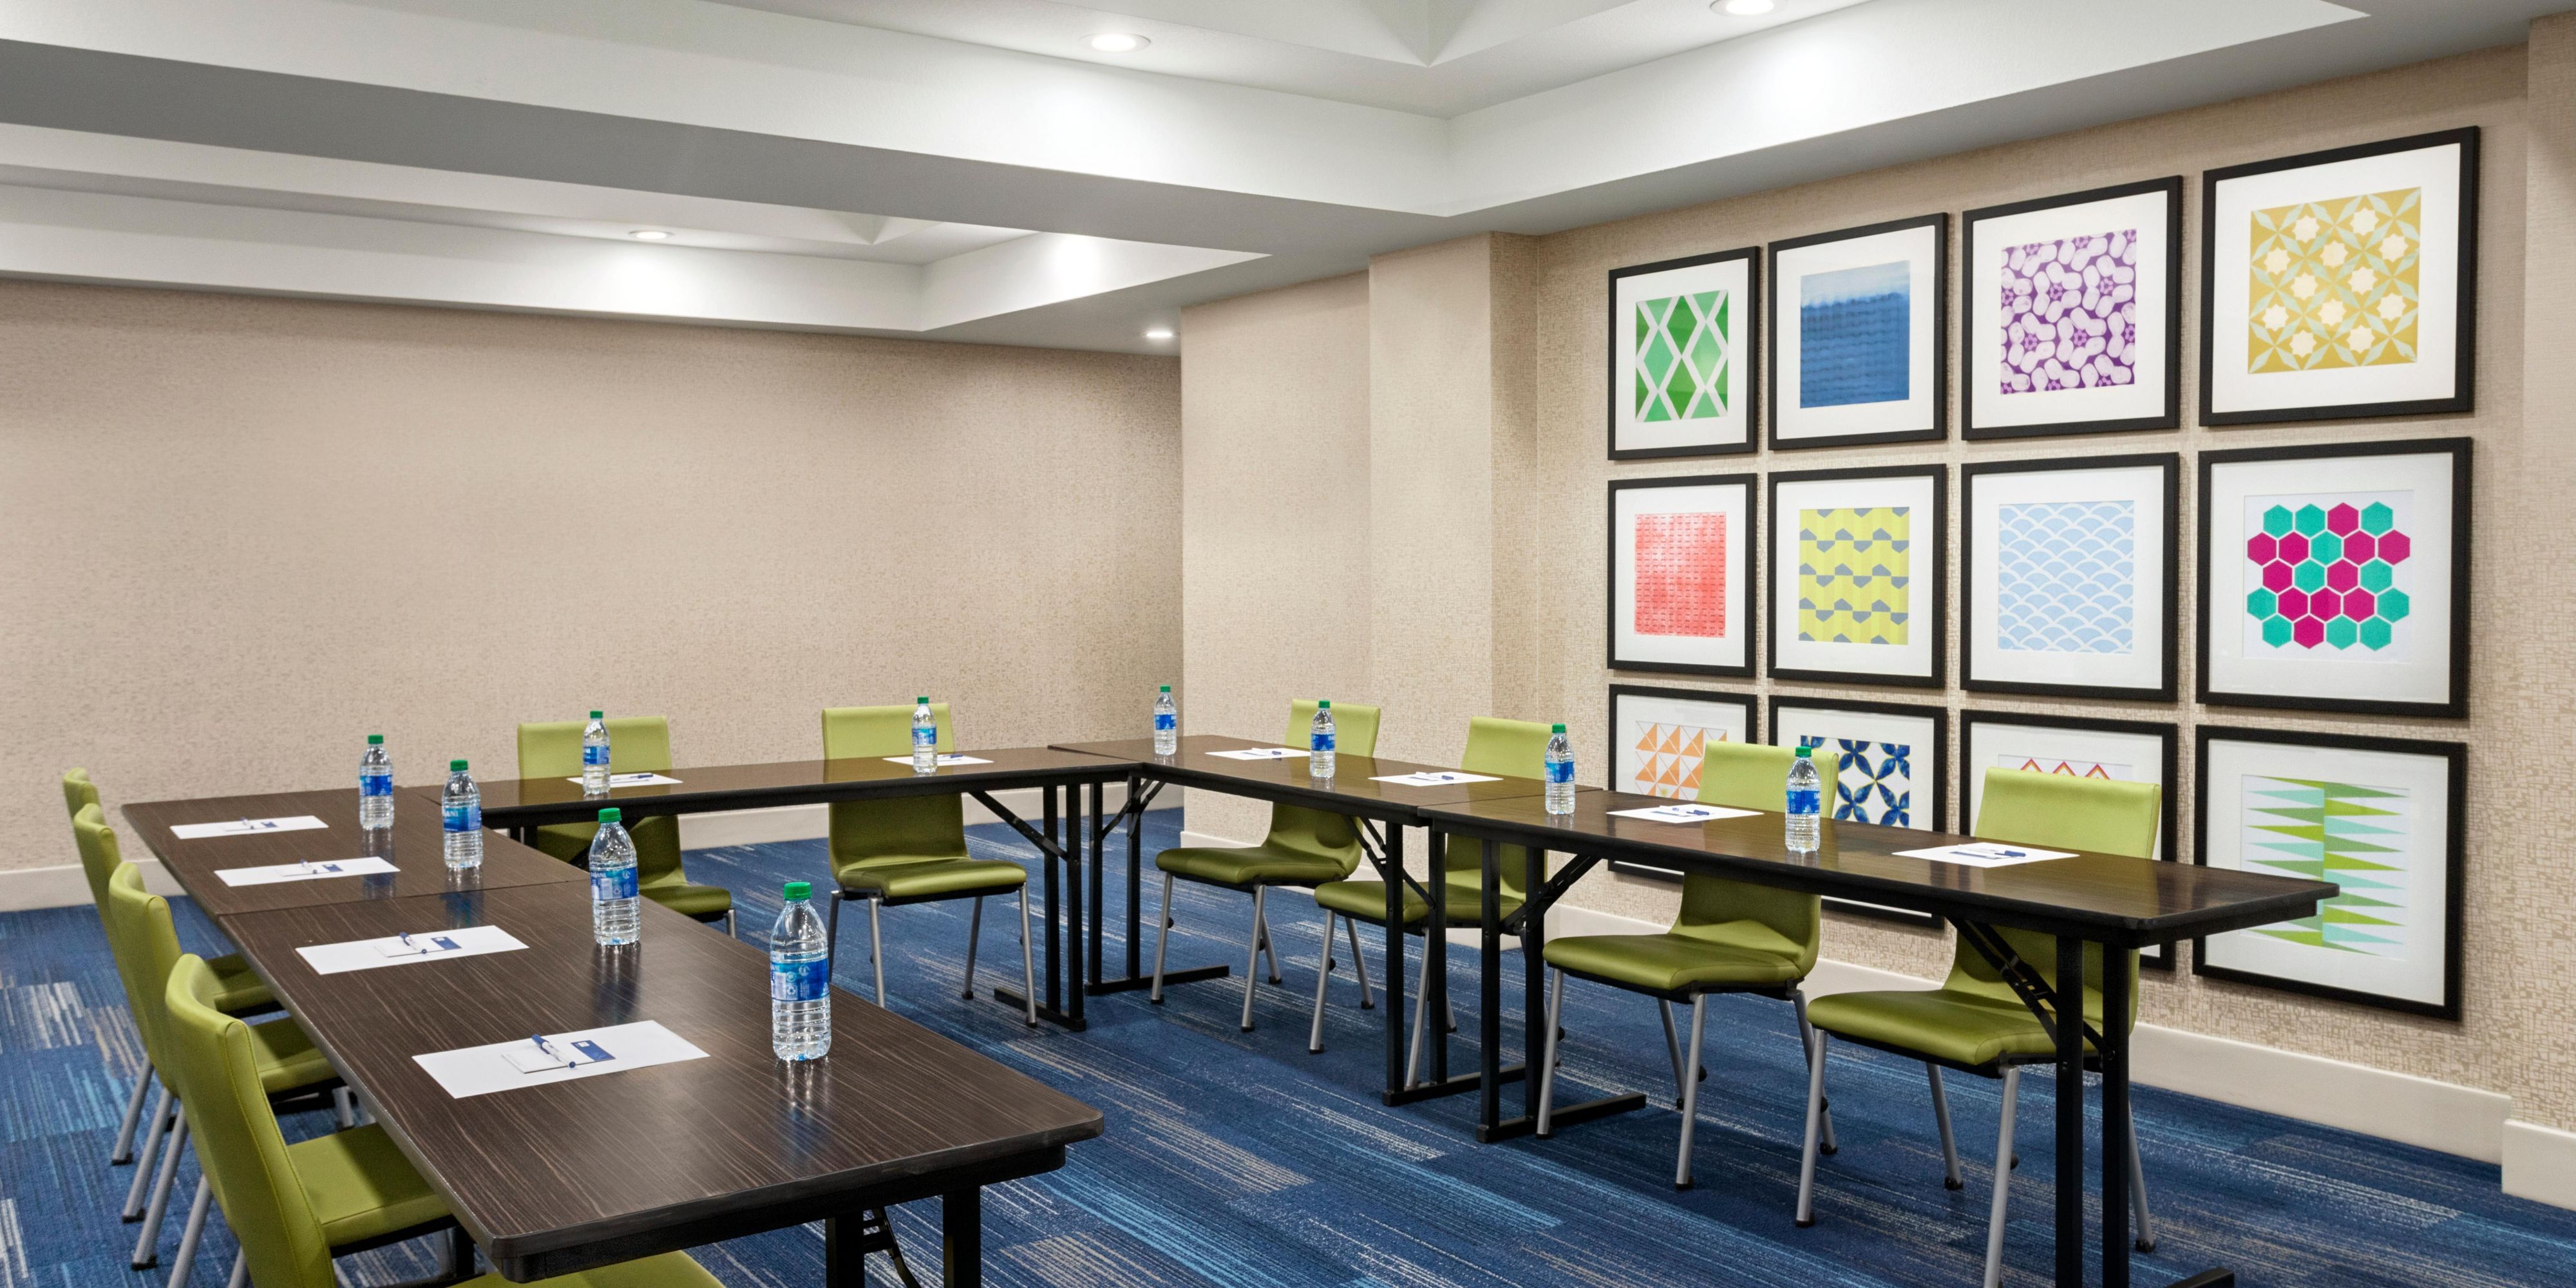 From sports teams to family reunions, we love a good gathering. Let us help with all the details, so you can get ready to play or get ready to celebrate!  Our Durant event space is flexible and can also accommodate business meetings or corporate events for up to 75 people.